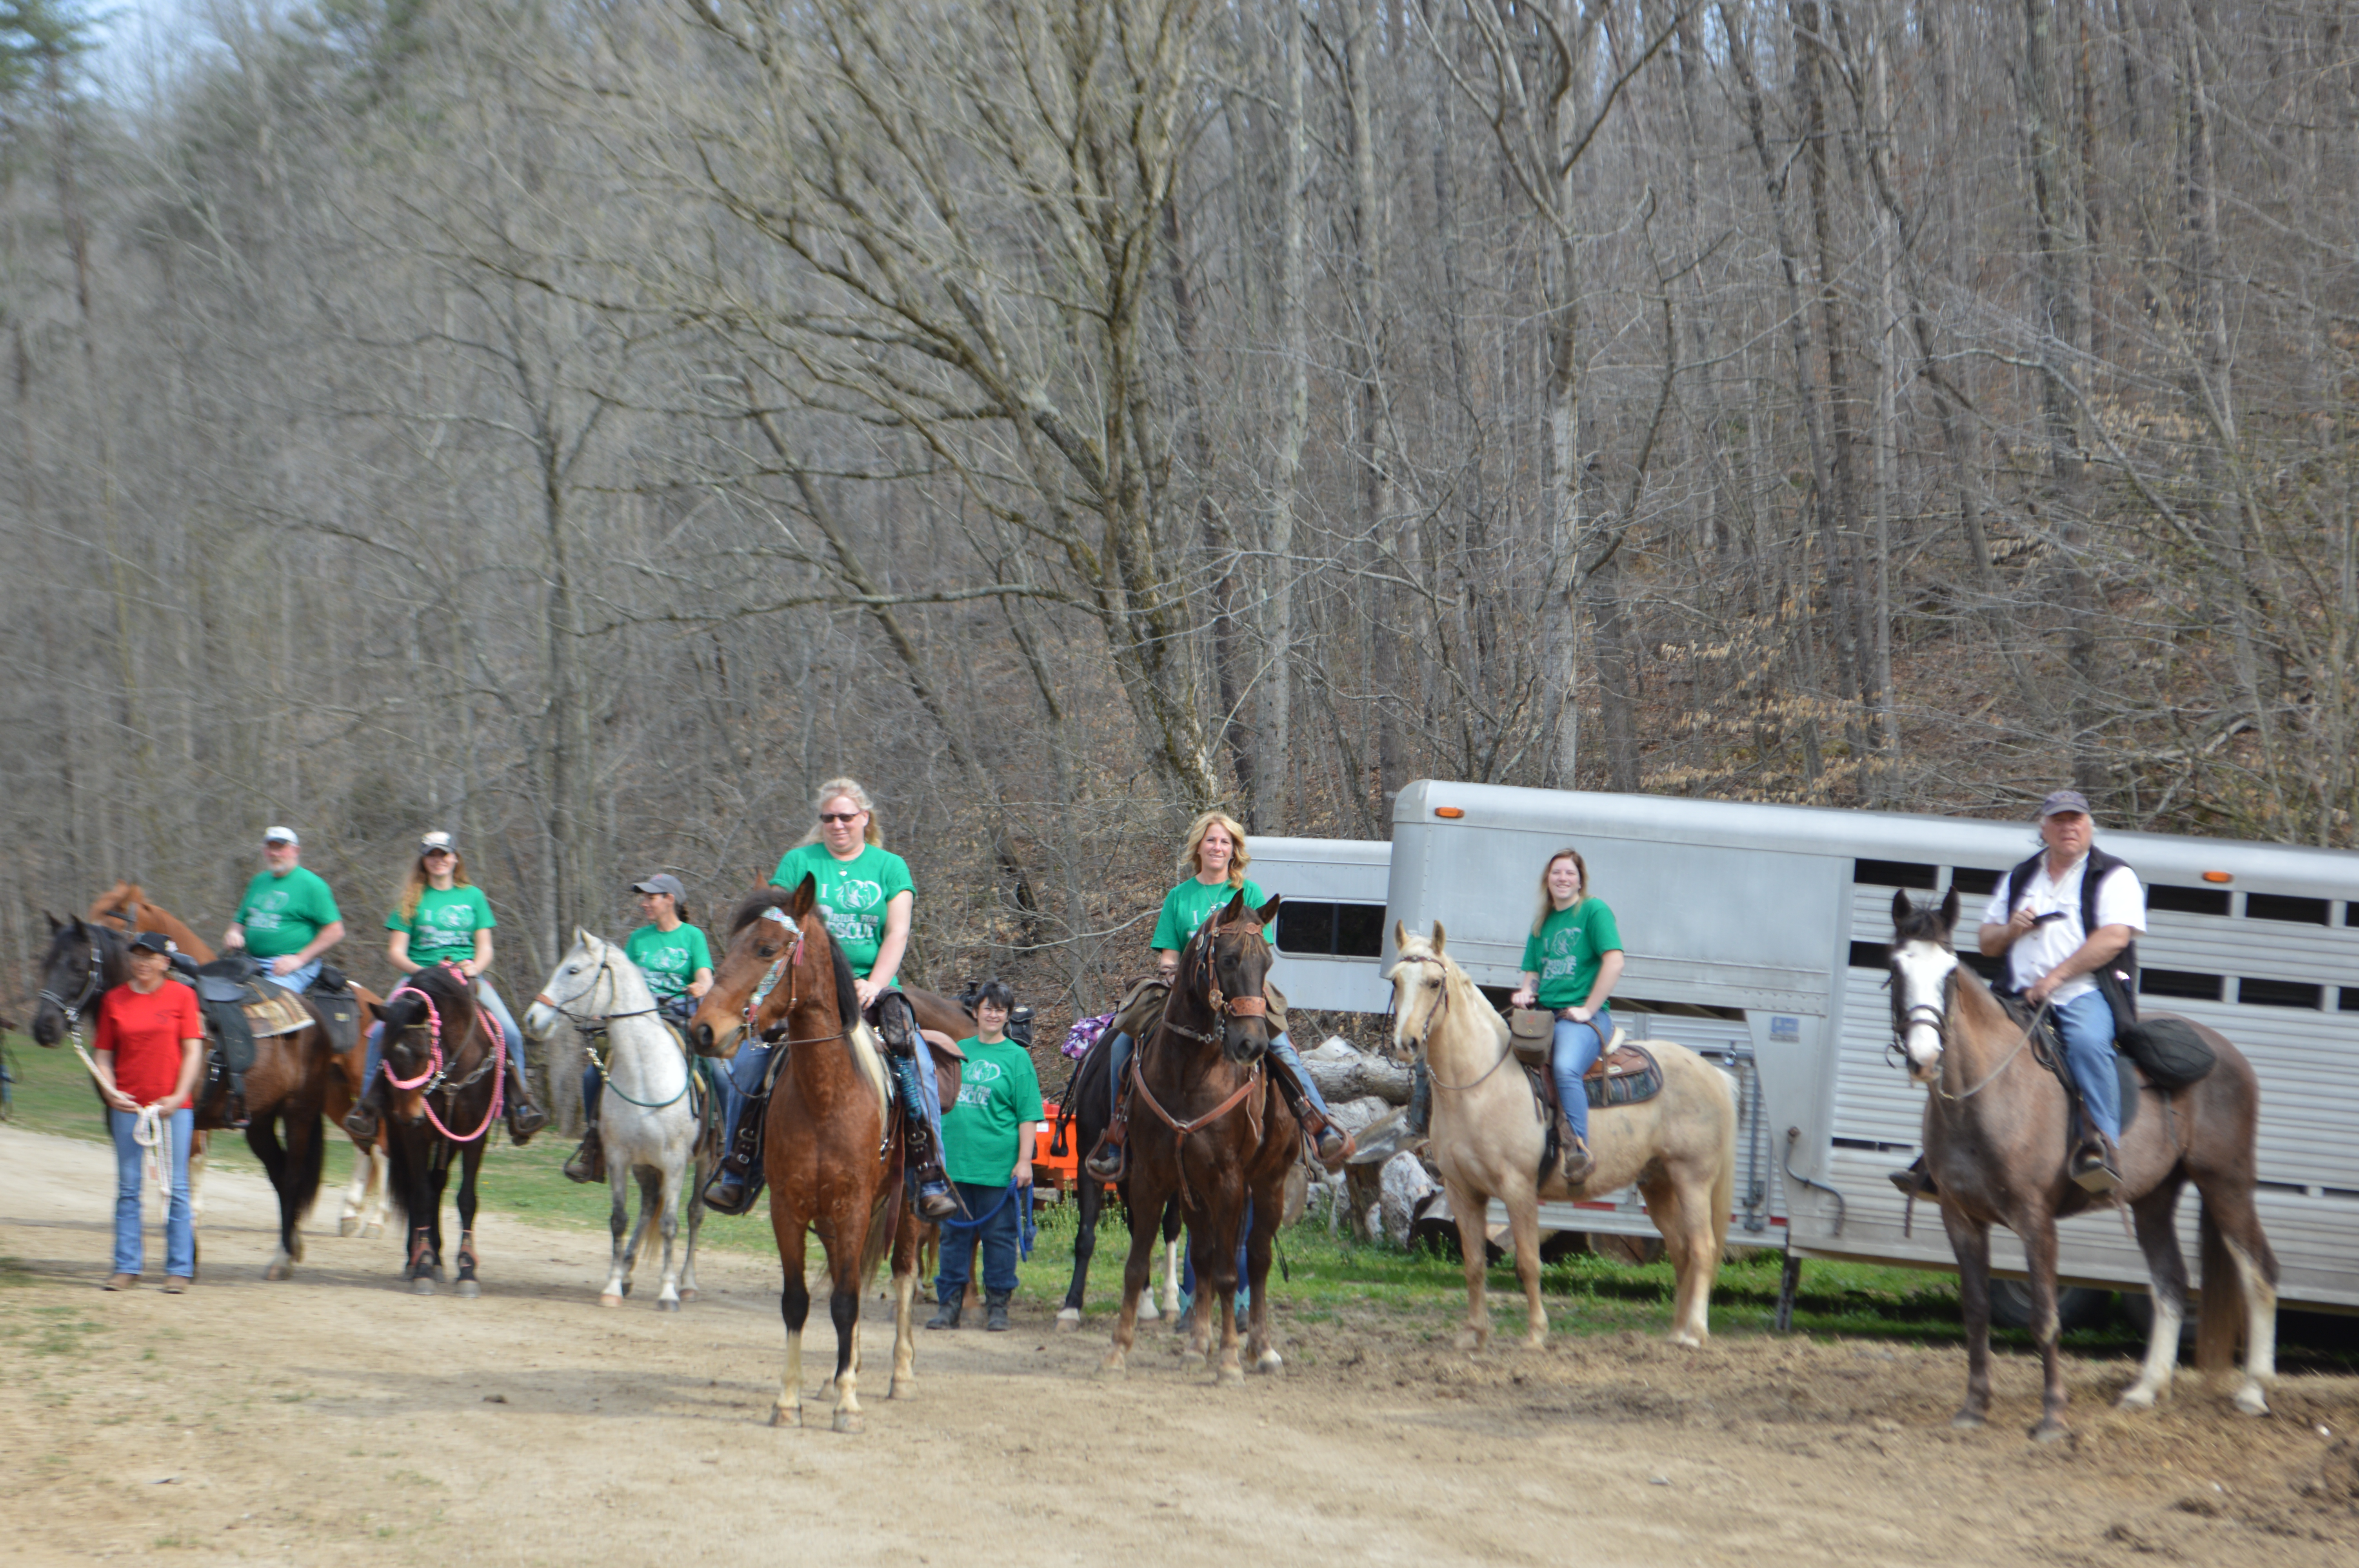 Come Ride for Rescue: Enjoying some of the best horse back riding trails on the East Coast in Ohio April 18th to April 21st 2019 while helping adoptable horses at Heart of Phoenix!